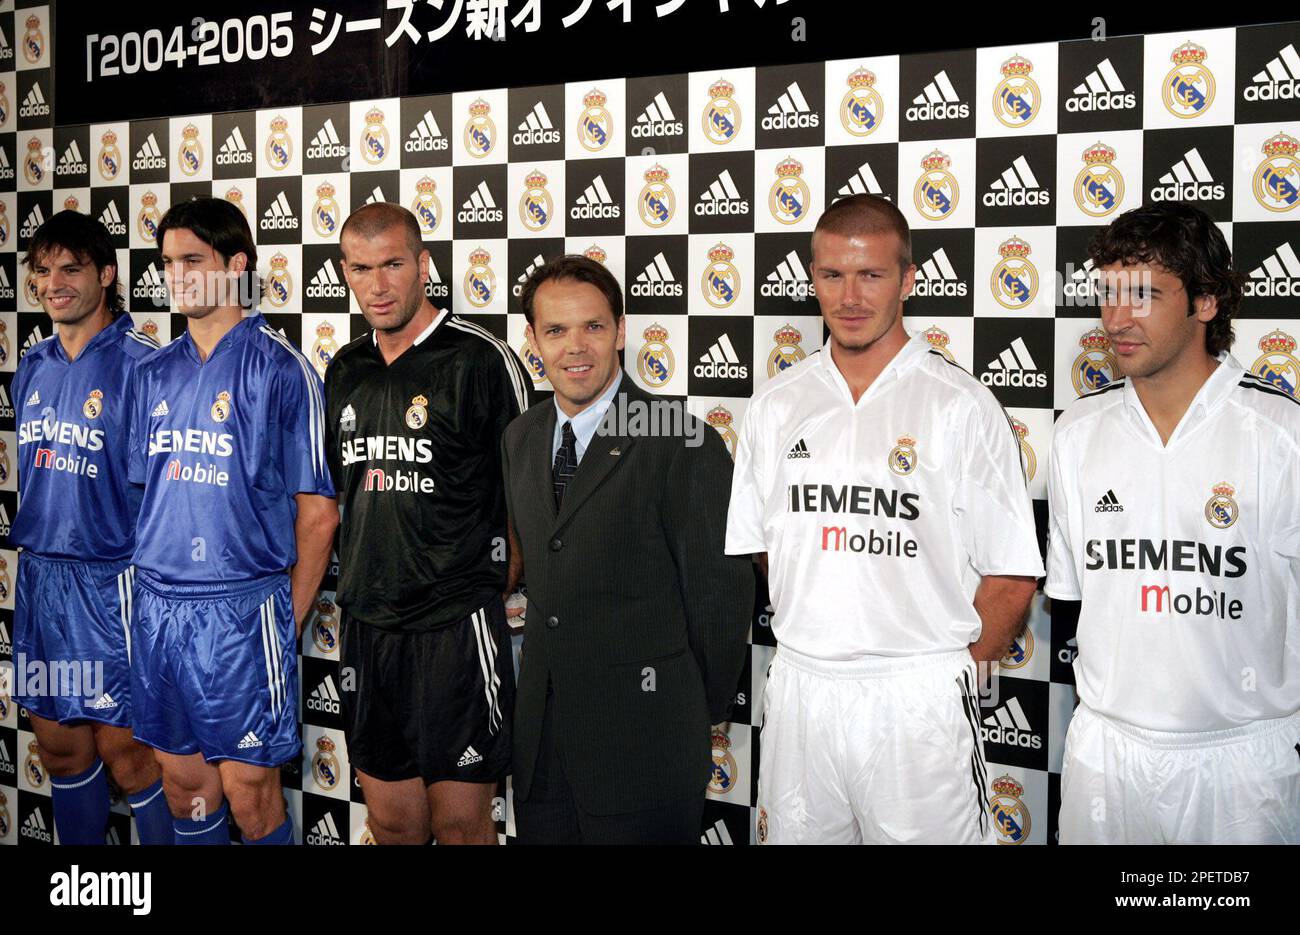 Real Madrid' players wearing the Spanish giants team's new official jerseys for the 2004-2005 regular season line up with the uniform maker adidas Japan K.K. President Robert Langstaff, third from right, during a media unveiling in Tokyo Wednesday, July 28, 2004. Real Madrid, currently in Japan on a weeklong preseason tour, will play in the new jerseys in friendly matches against J-League teams JEF United Ichihara on July 29 and Tokyo Verdy 1969 on Aug. 1. Players from left are: Fernando Morientes, Santiago Solari, both in the away jerseys, Zinedine Zidane in the 3rd jersey, Langstaff, David B Stock Photo